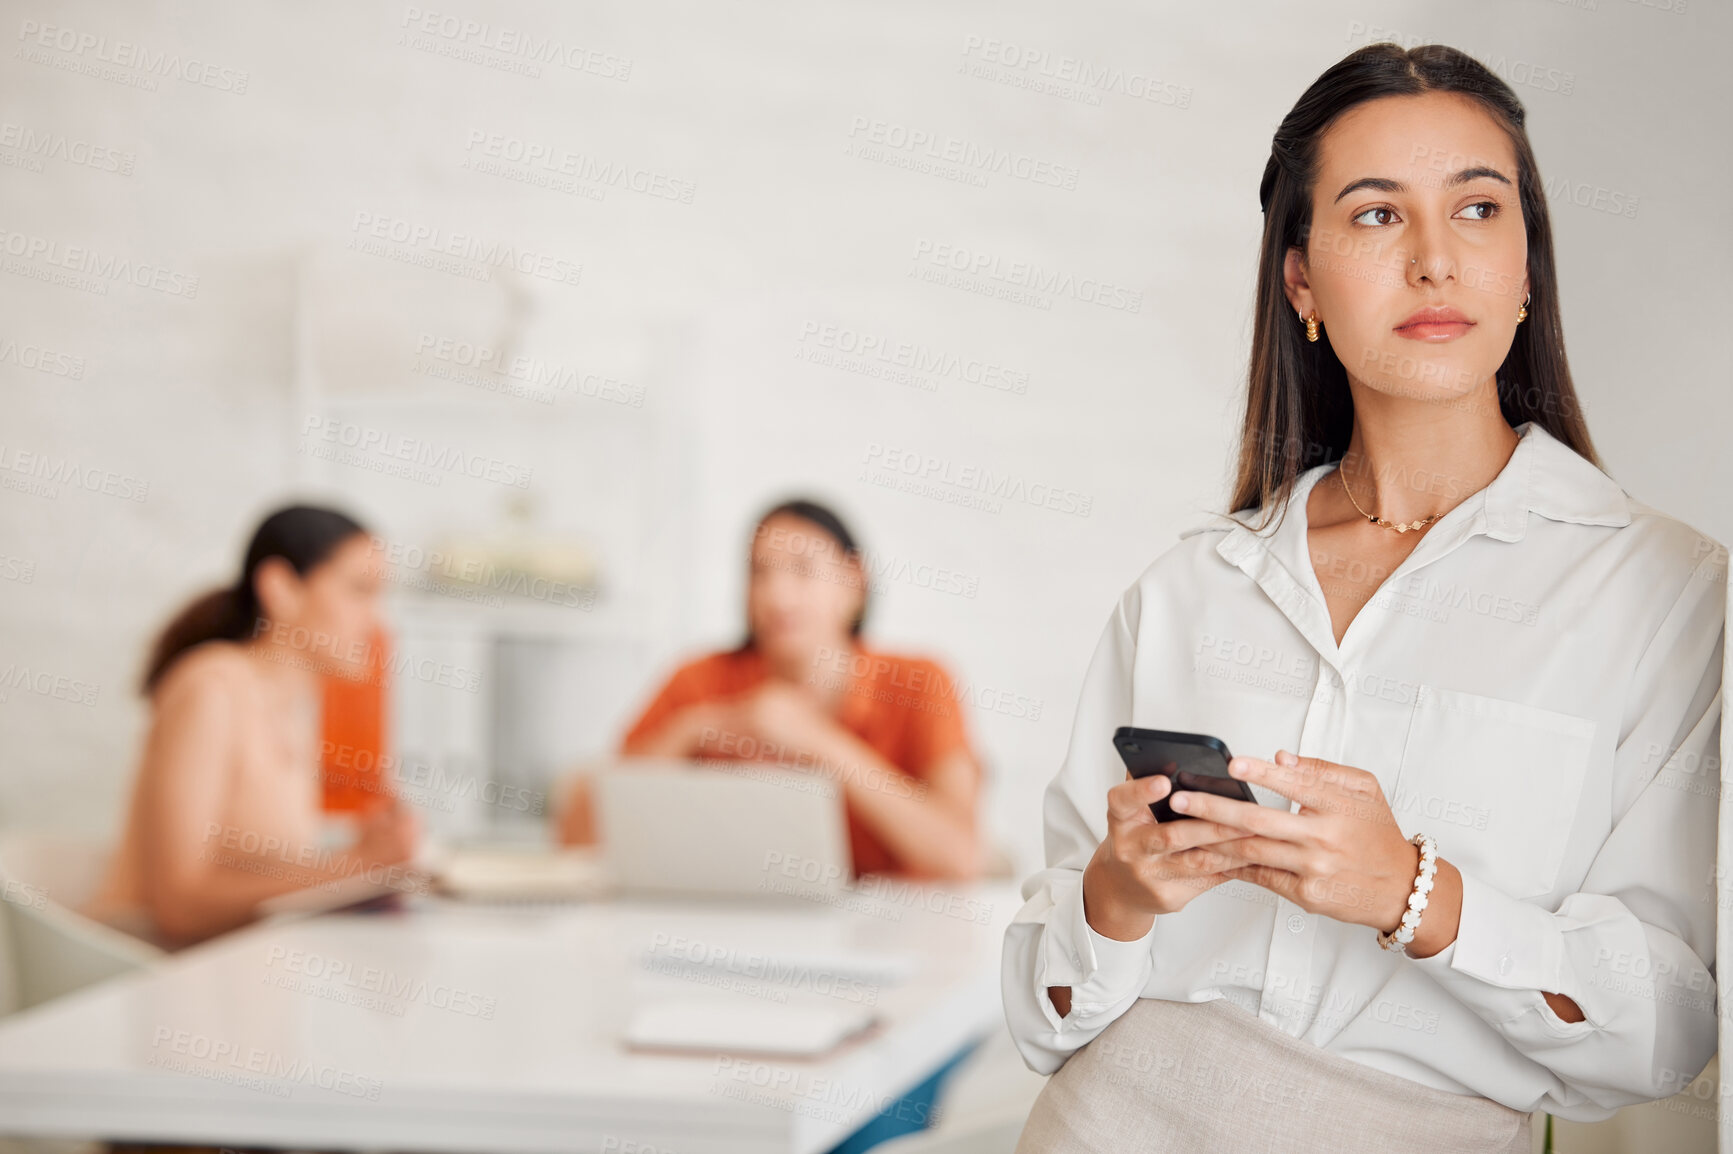 Buy stock photo One young hispanic business woman thinking while texting on a cellphone in an office with her colleagues in the background. Entrepreneur making a choice and decision while browsing and planning online with smartphone